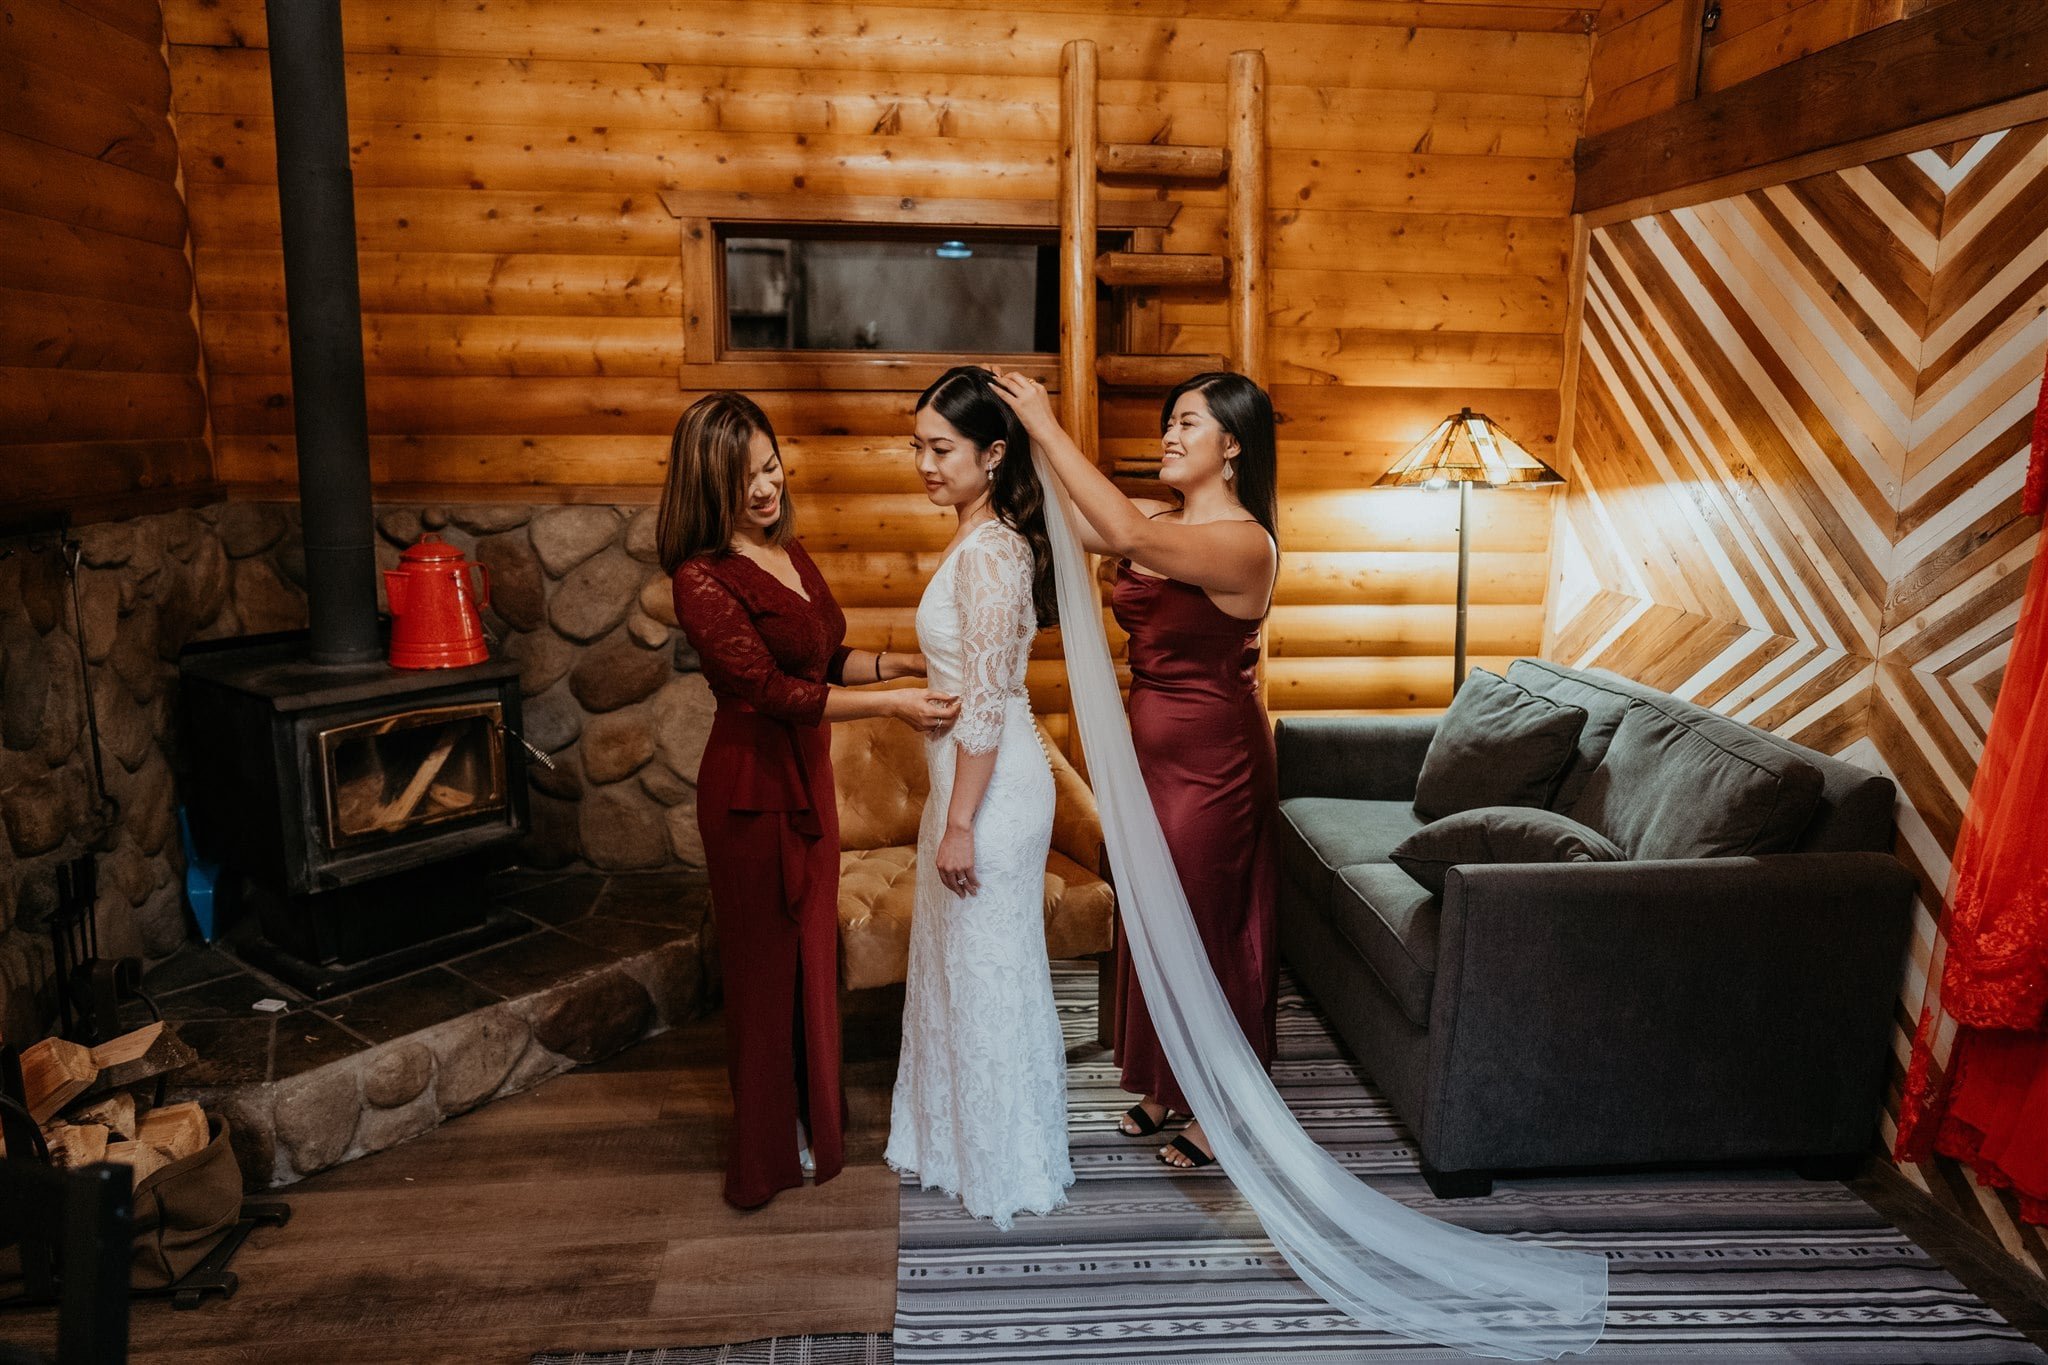 Family helping bride get ready in a cabin